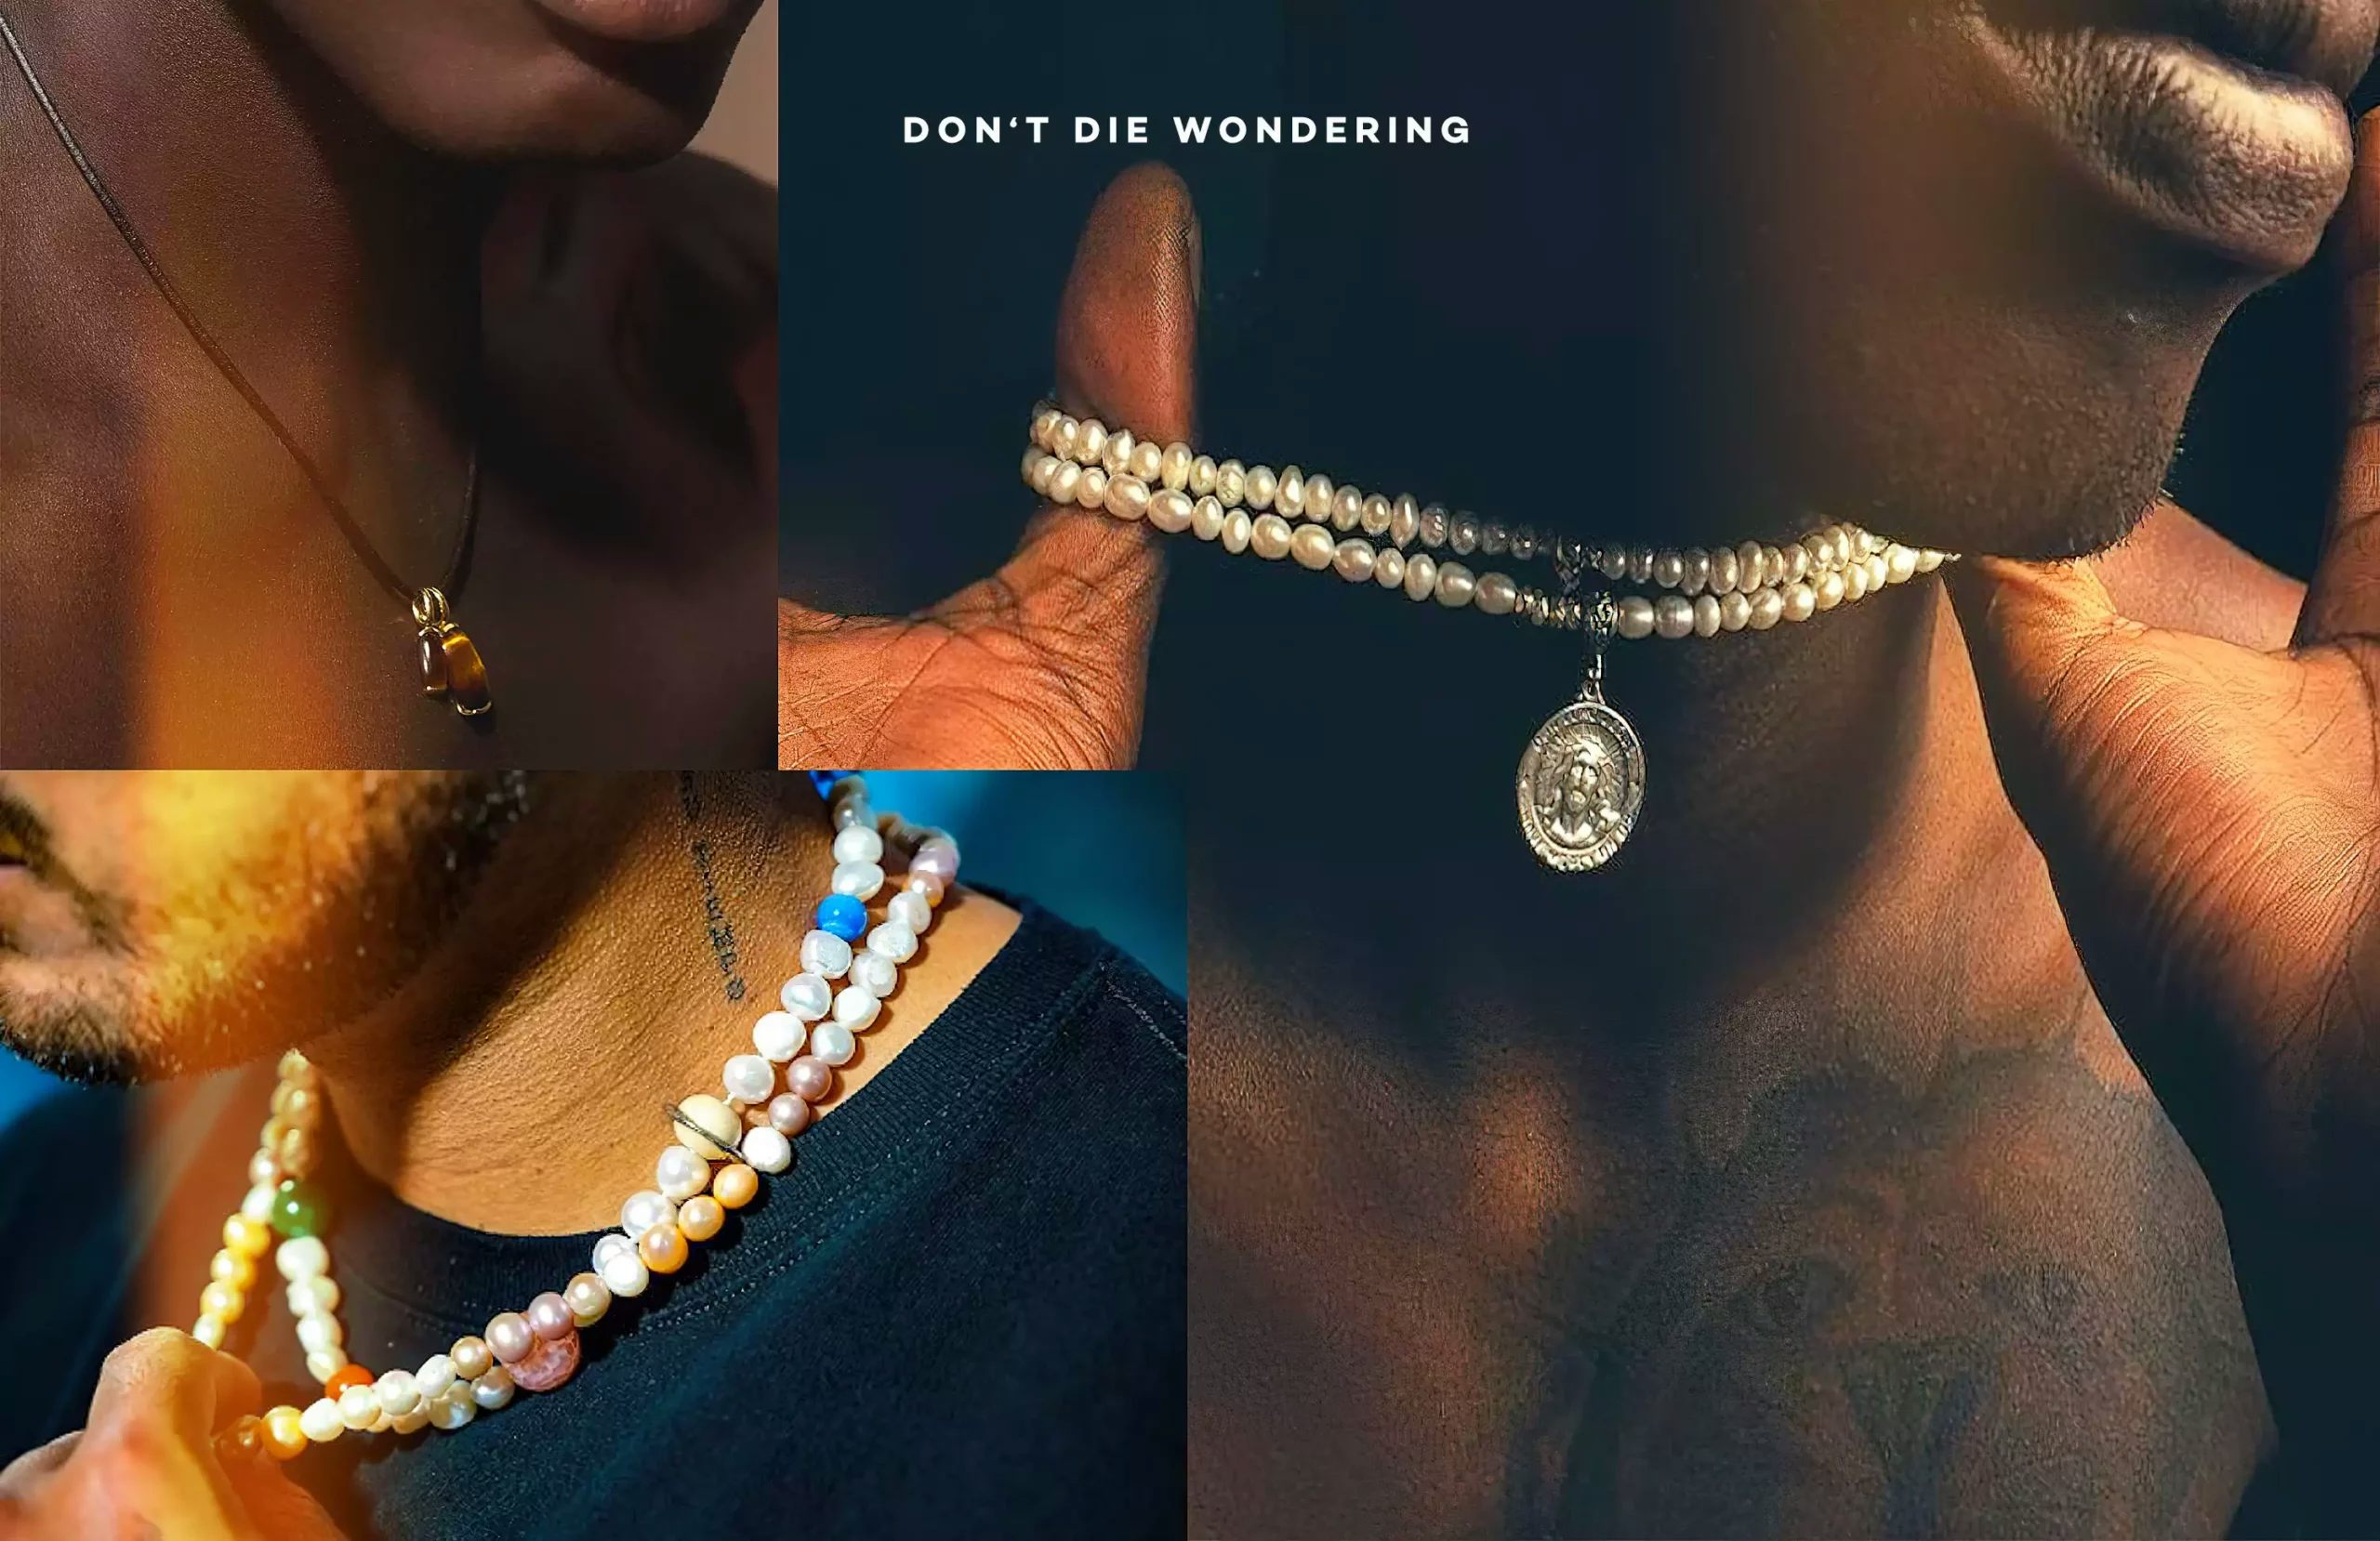 The Man With a Pearl Earring: Making a Case for Male Jewellery